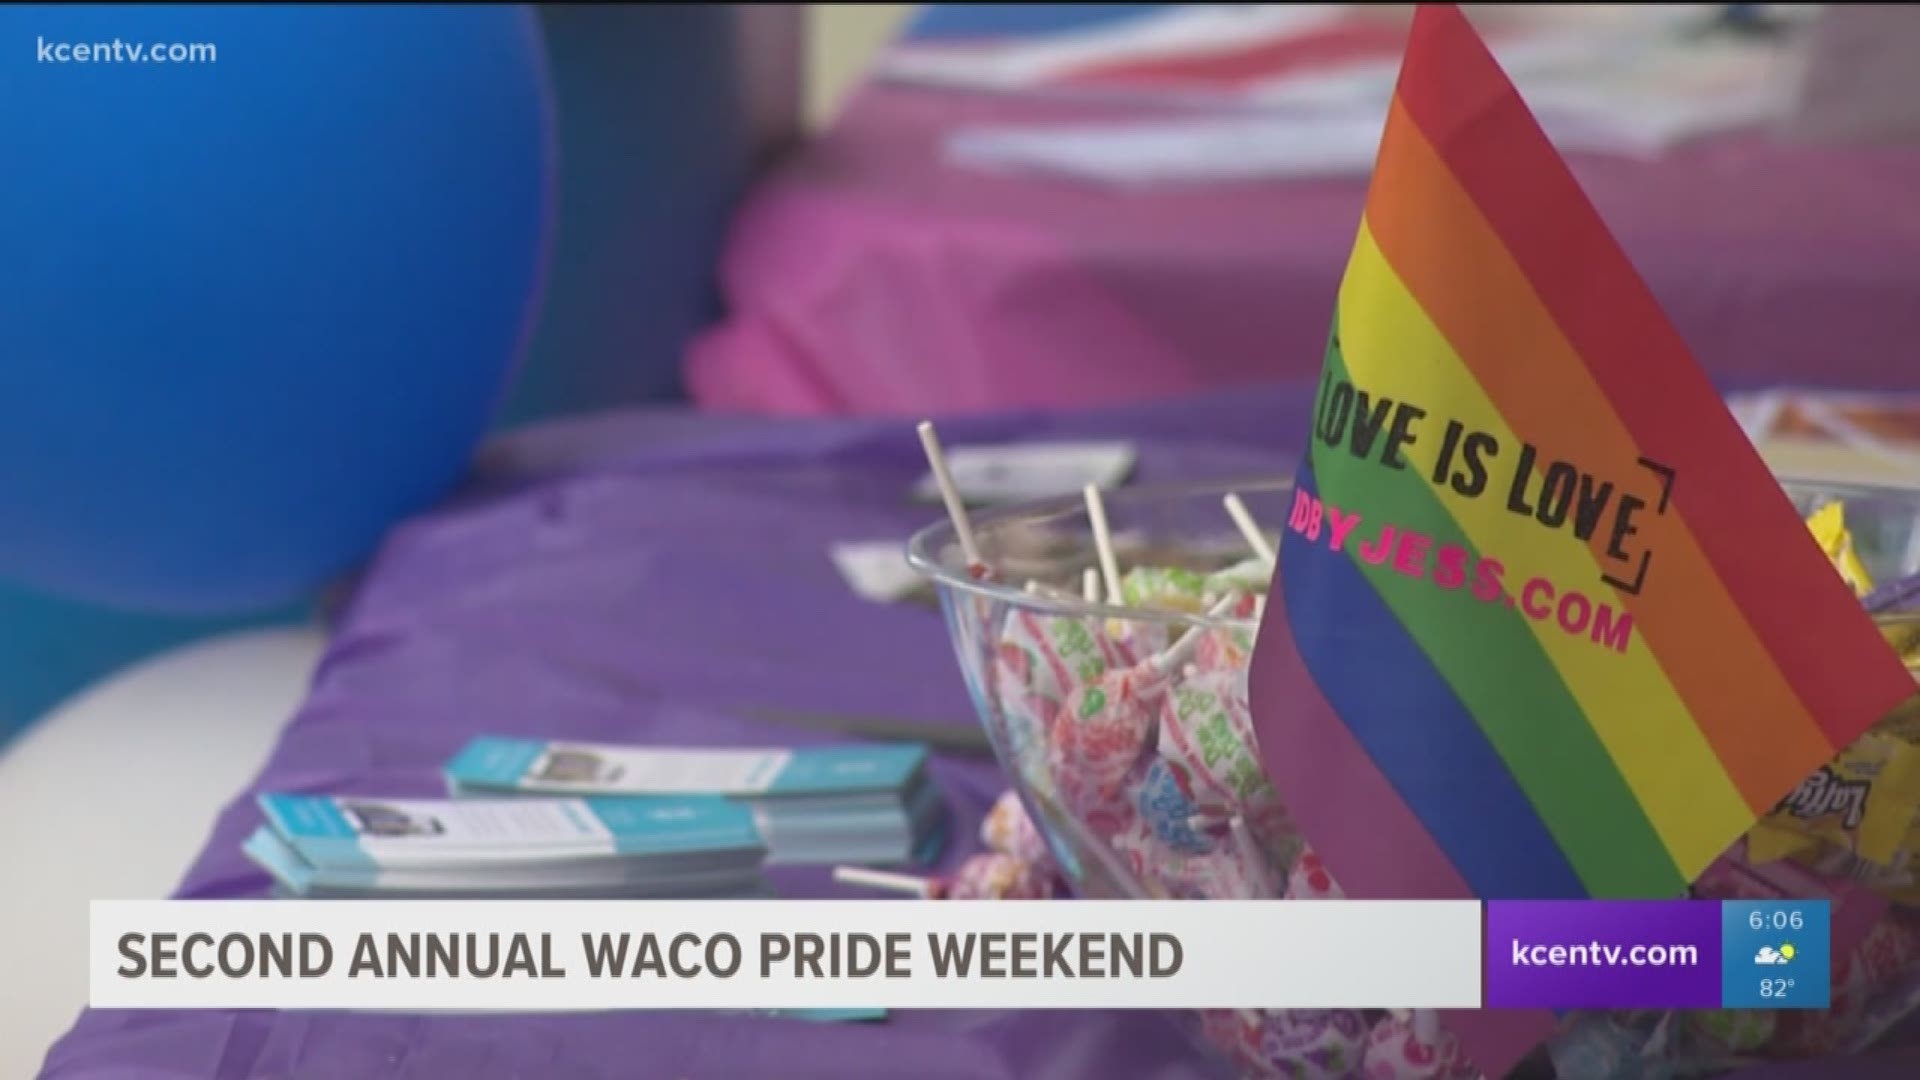 The Waco LGBTQ community is holding its second annual Waco Pride Weekend.